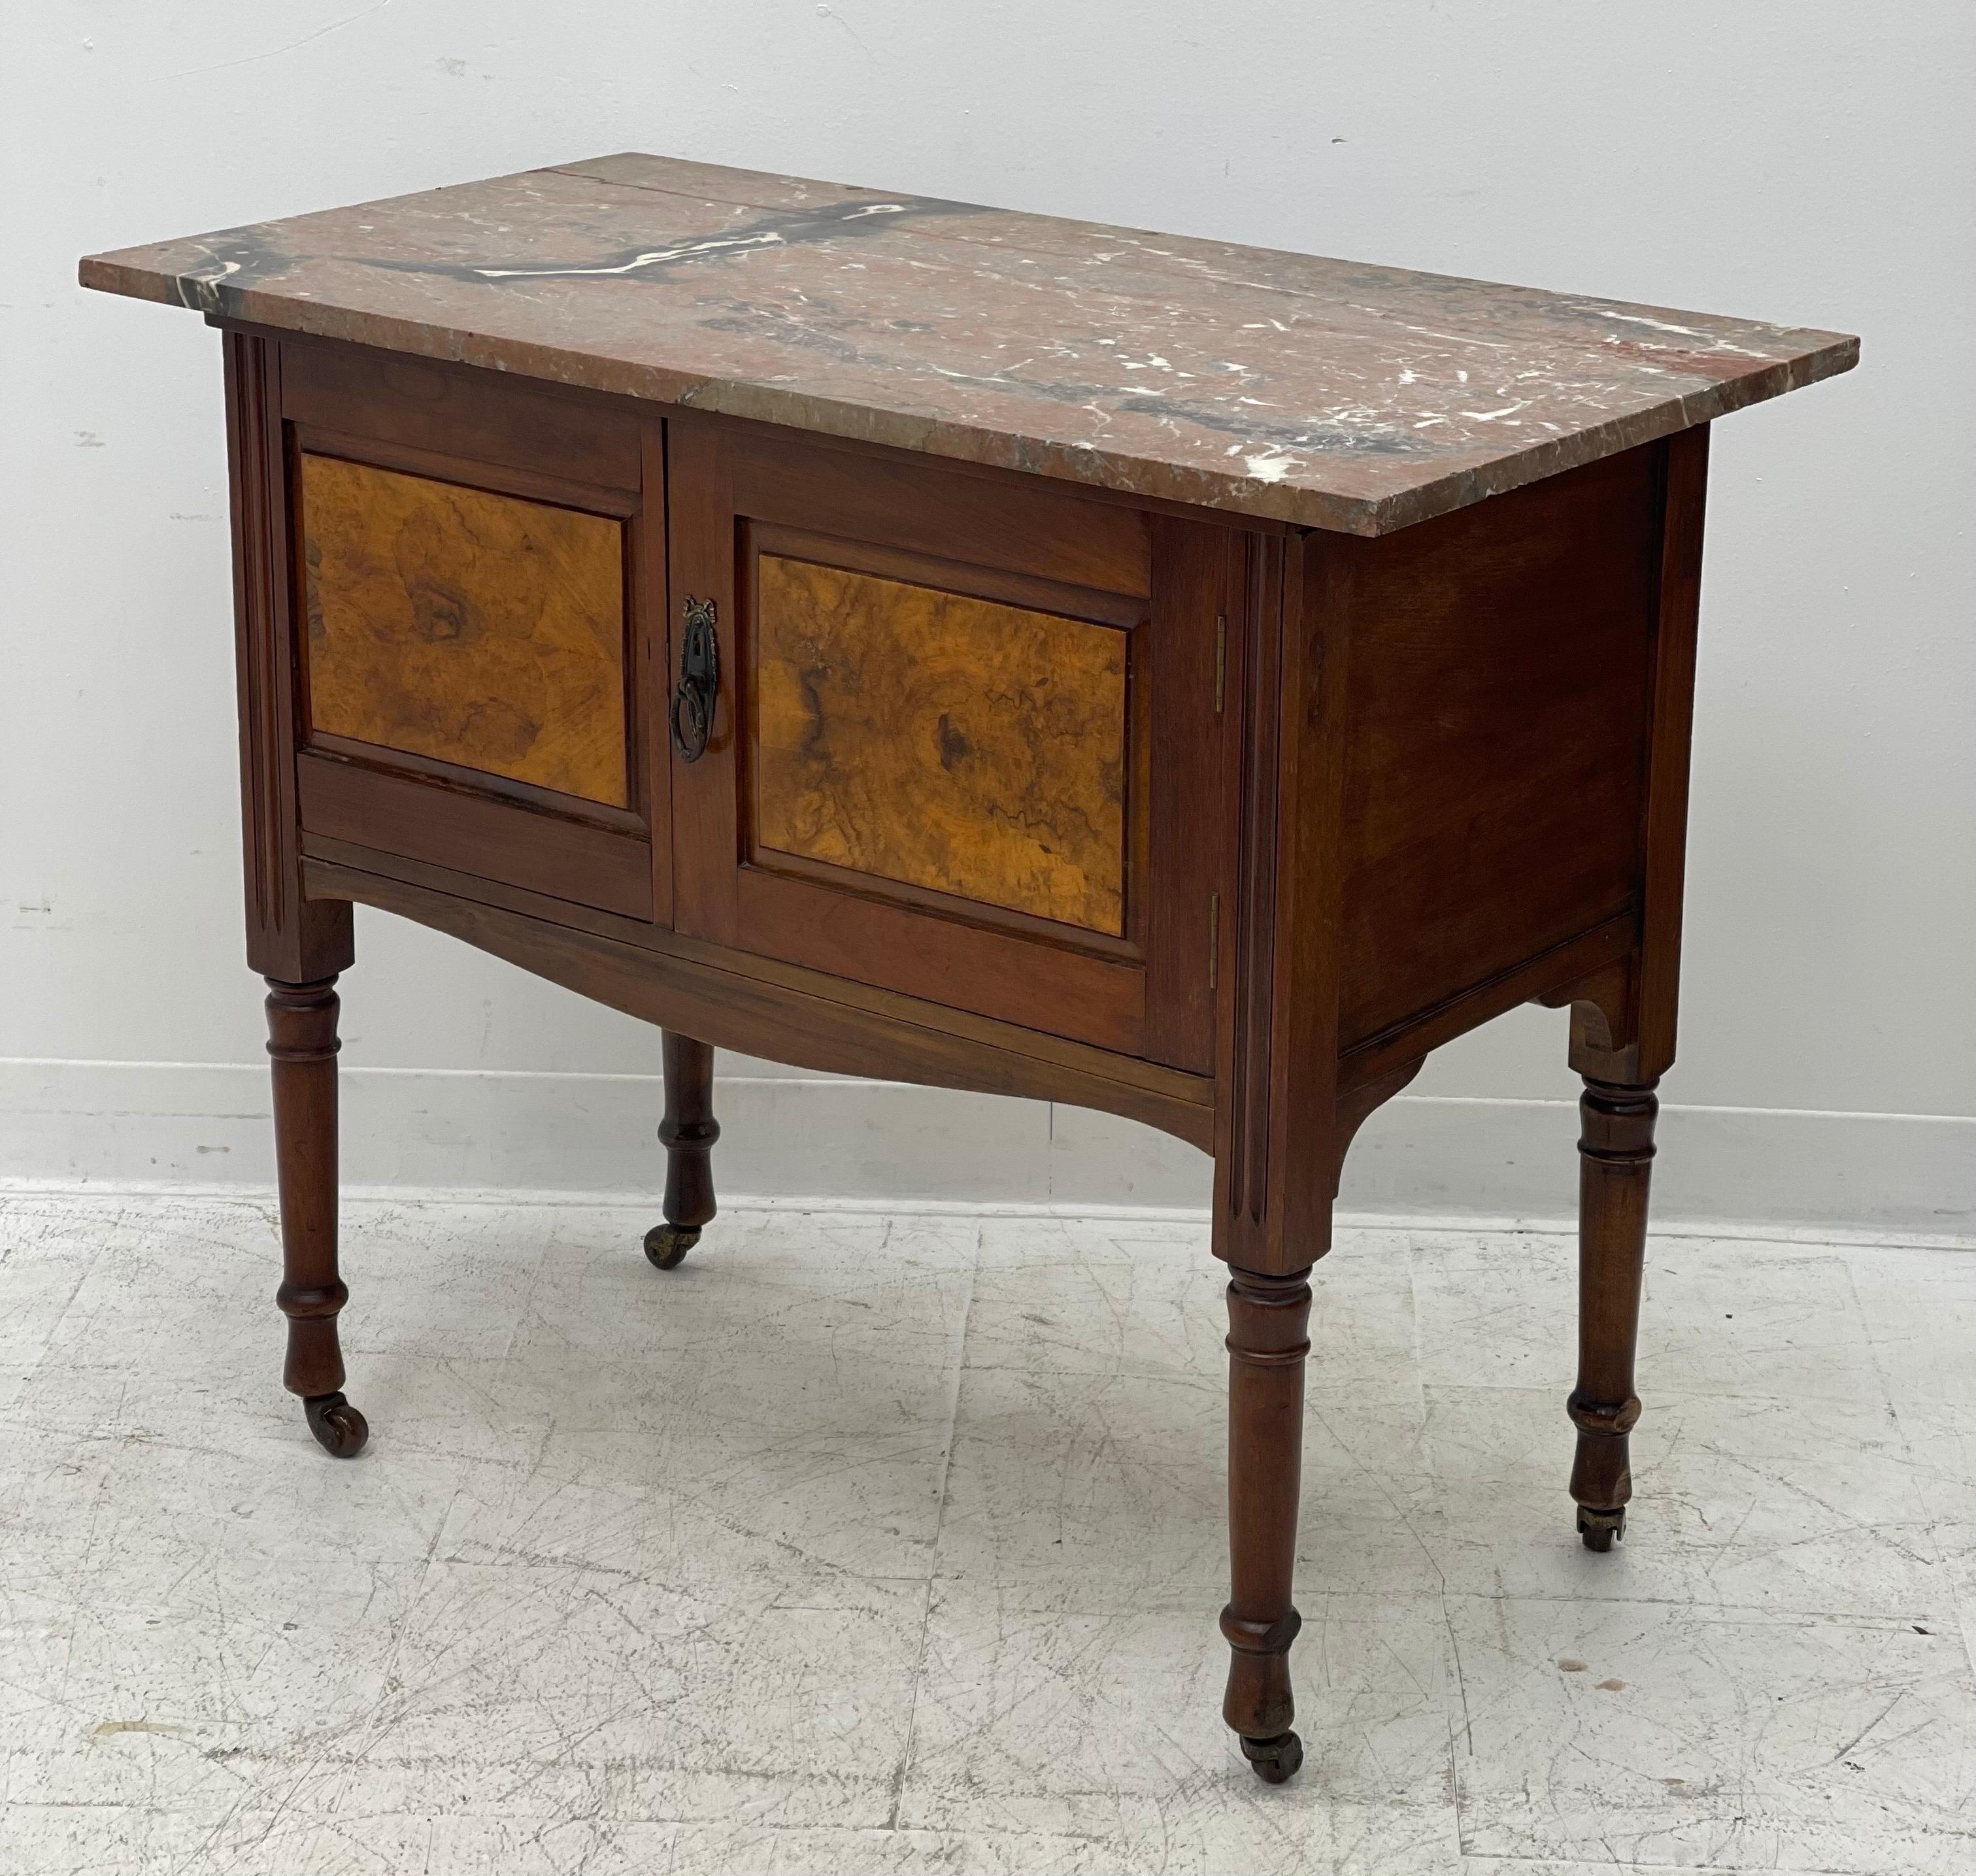 English buffet with marble top and 2 doors. The handles and escutcheons are bronze. It rests on four tapered legs that ends in casters.

Dimensions. Approx 36 W ; 30 H ; 19 D.